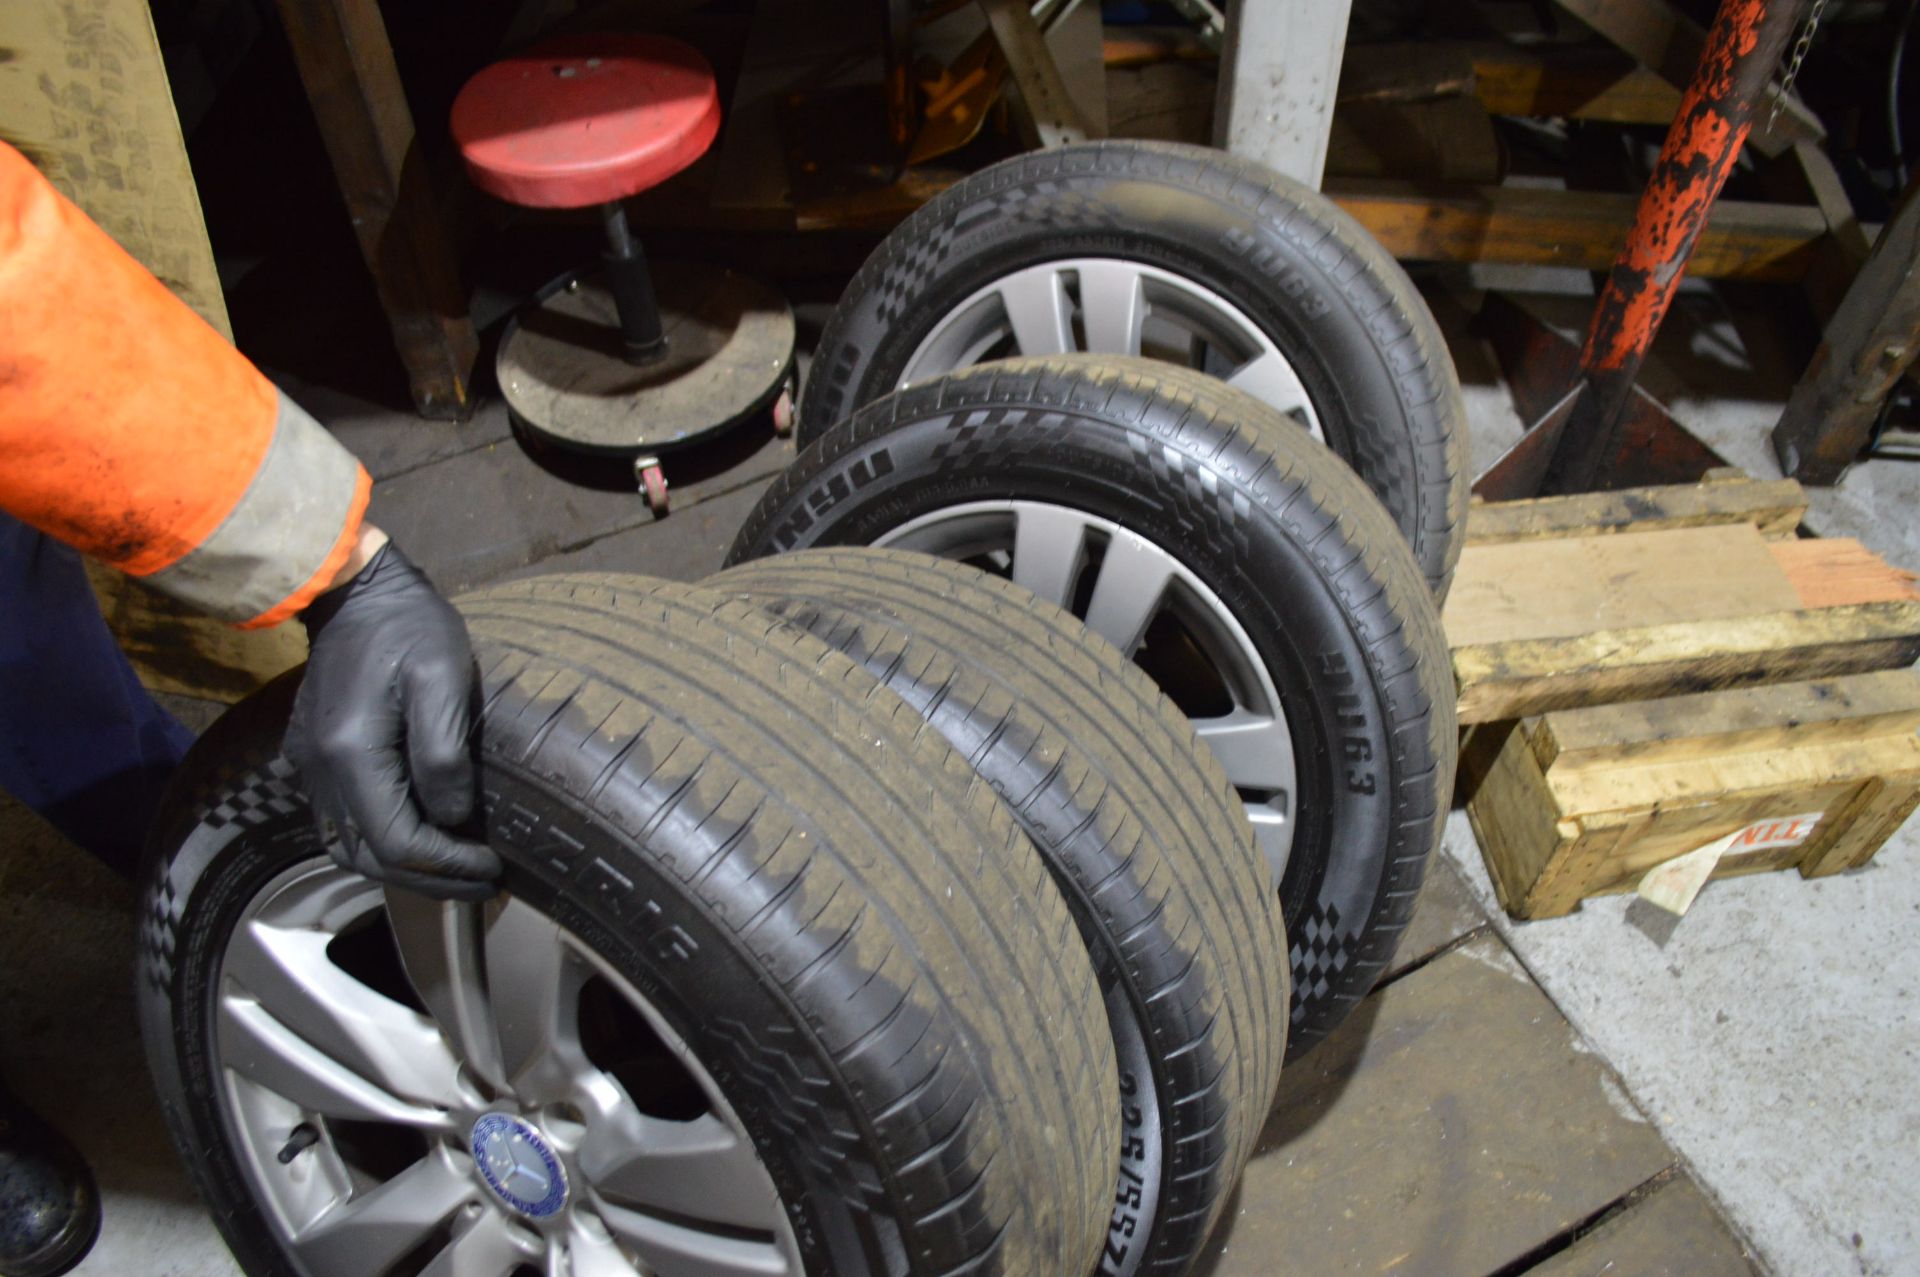 16" MERCEDES-BENZ ALLOY WHEELS - REMOVED FROM 2012 MERCEDES E CLASS *NO VAT* - Image 4 of 6